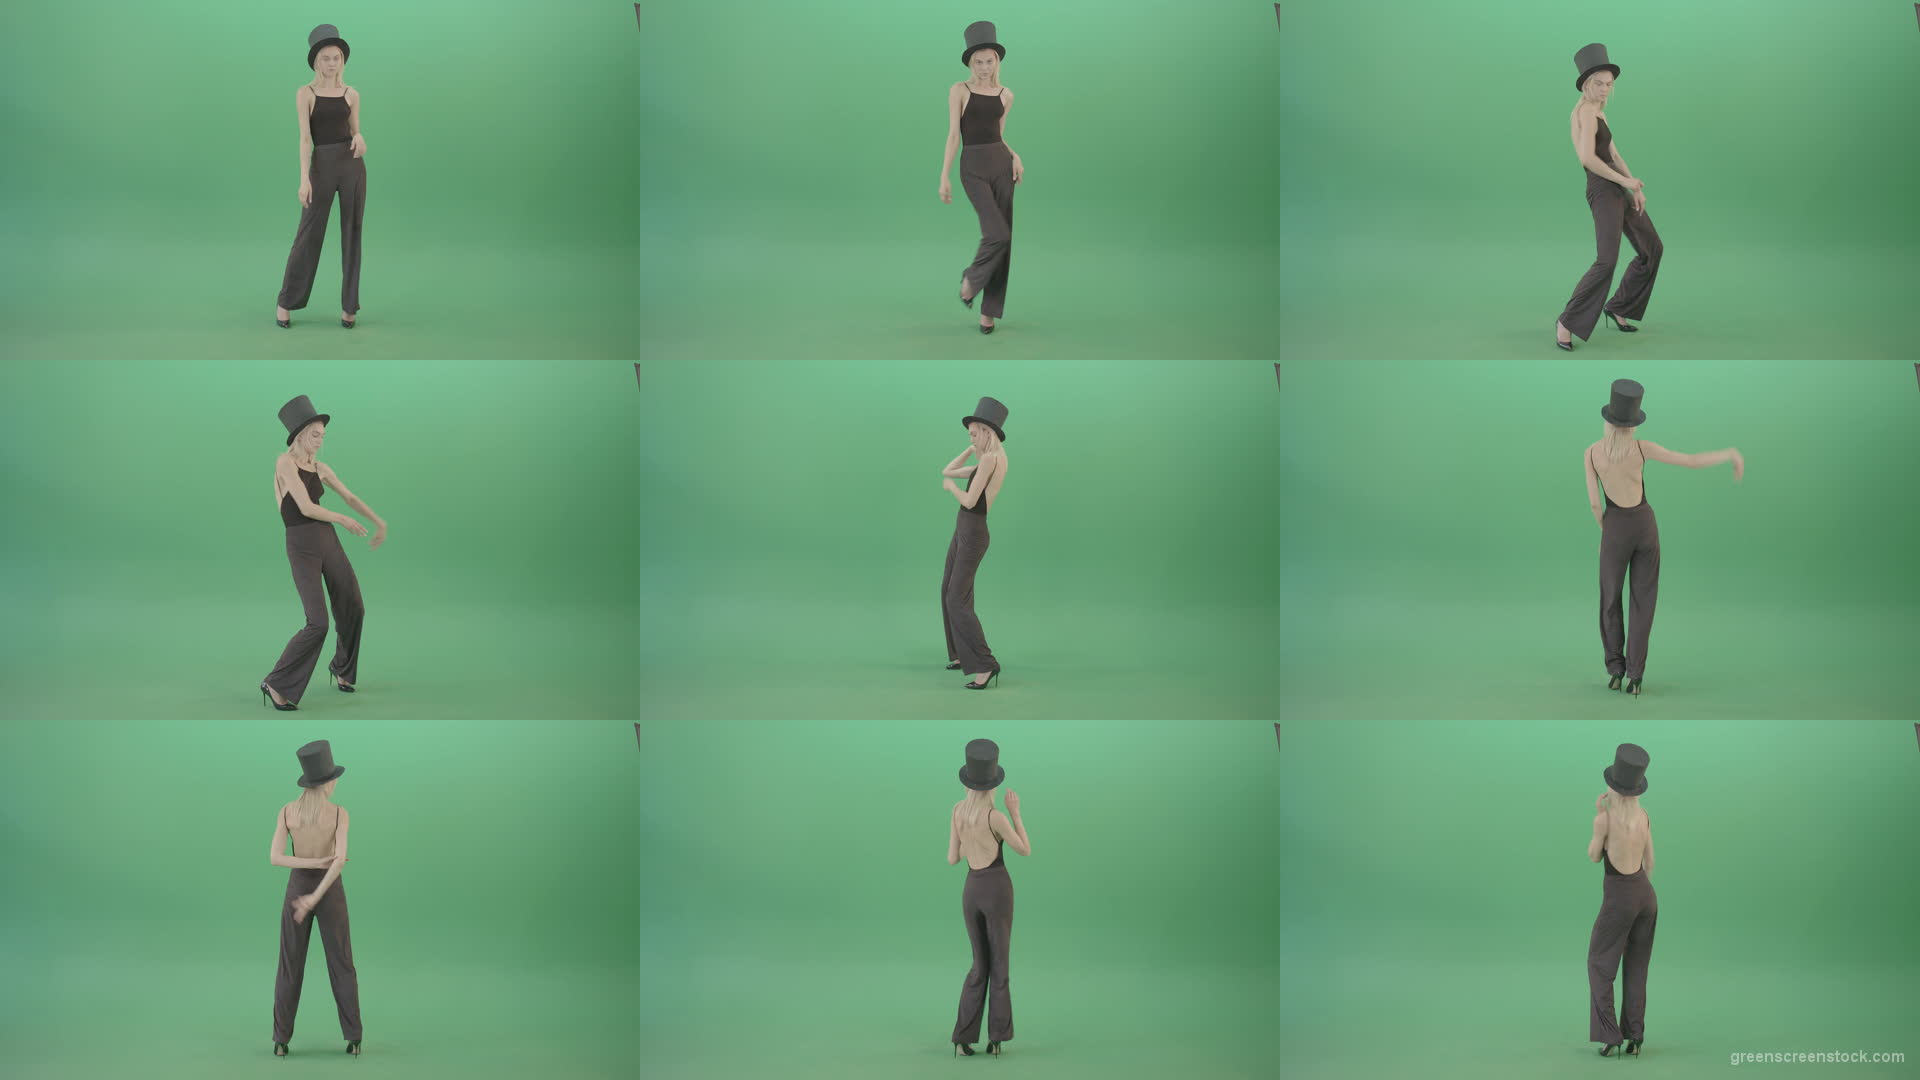 Magic-elegant-dancing-girl-slowly-moving-on-green-background-4K-Video-Footage-1920 Green Screen Stock